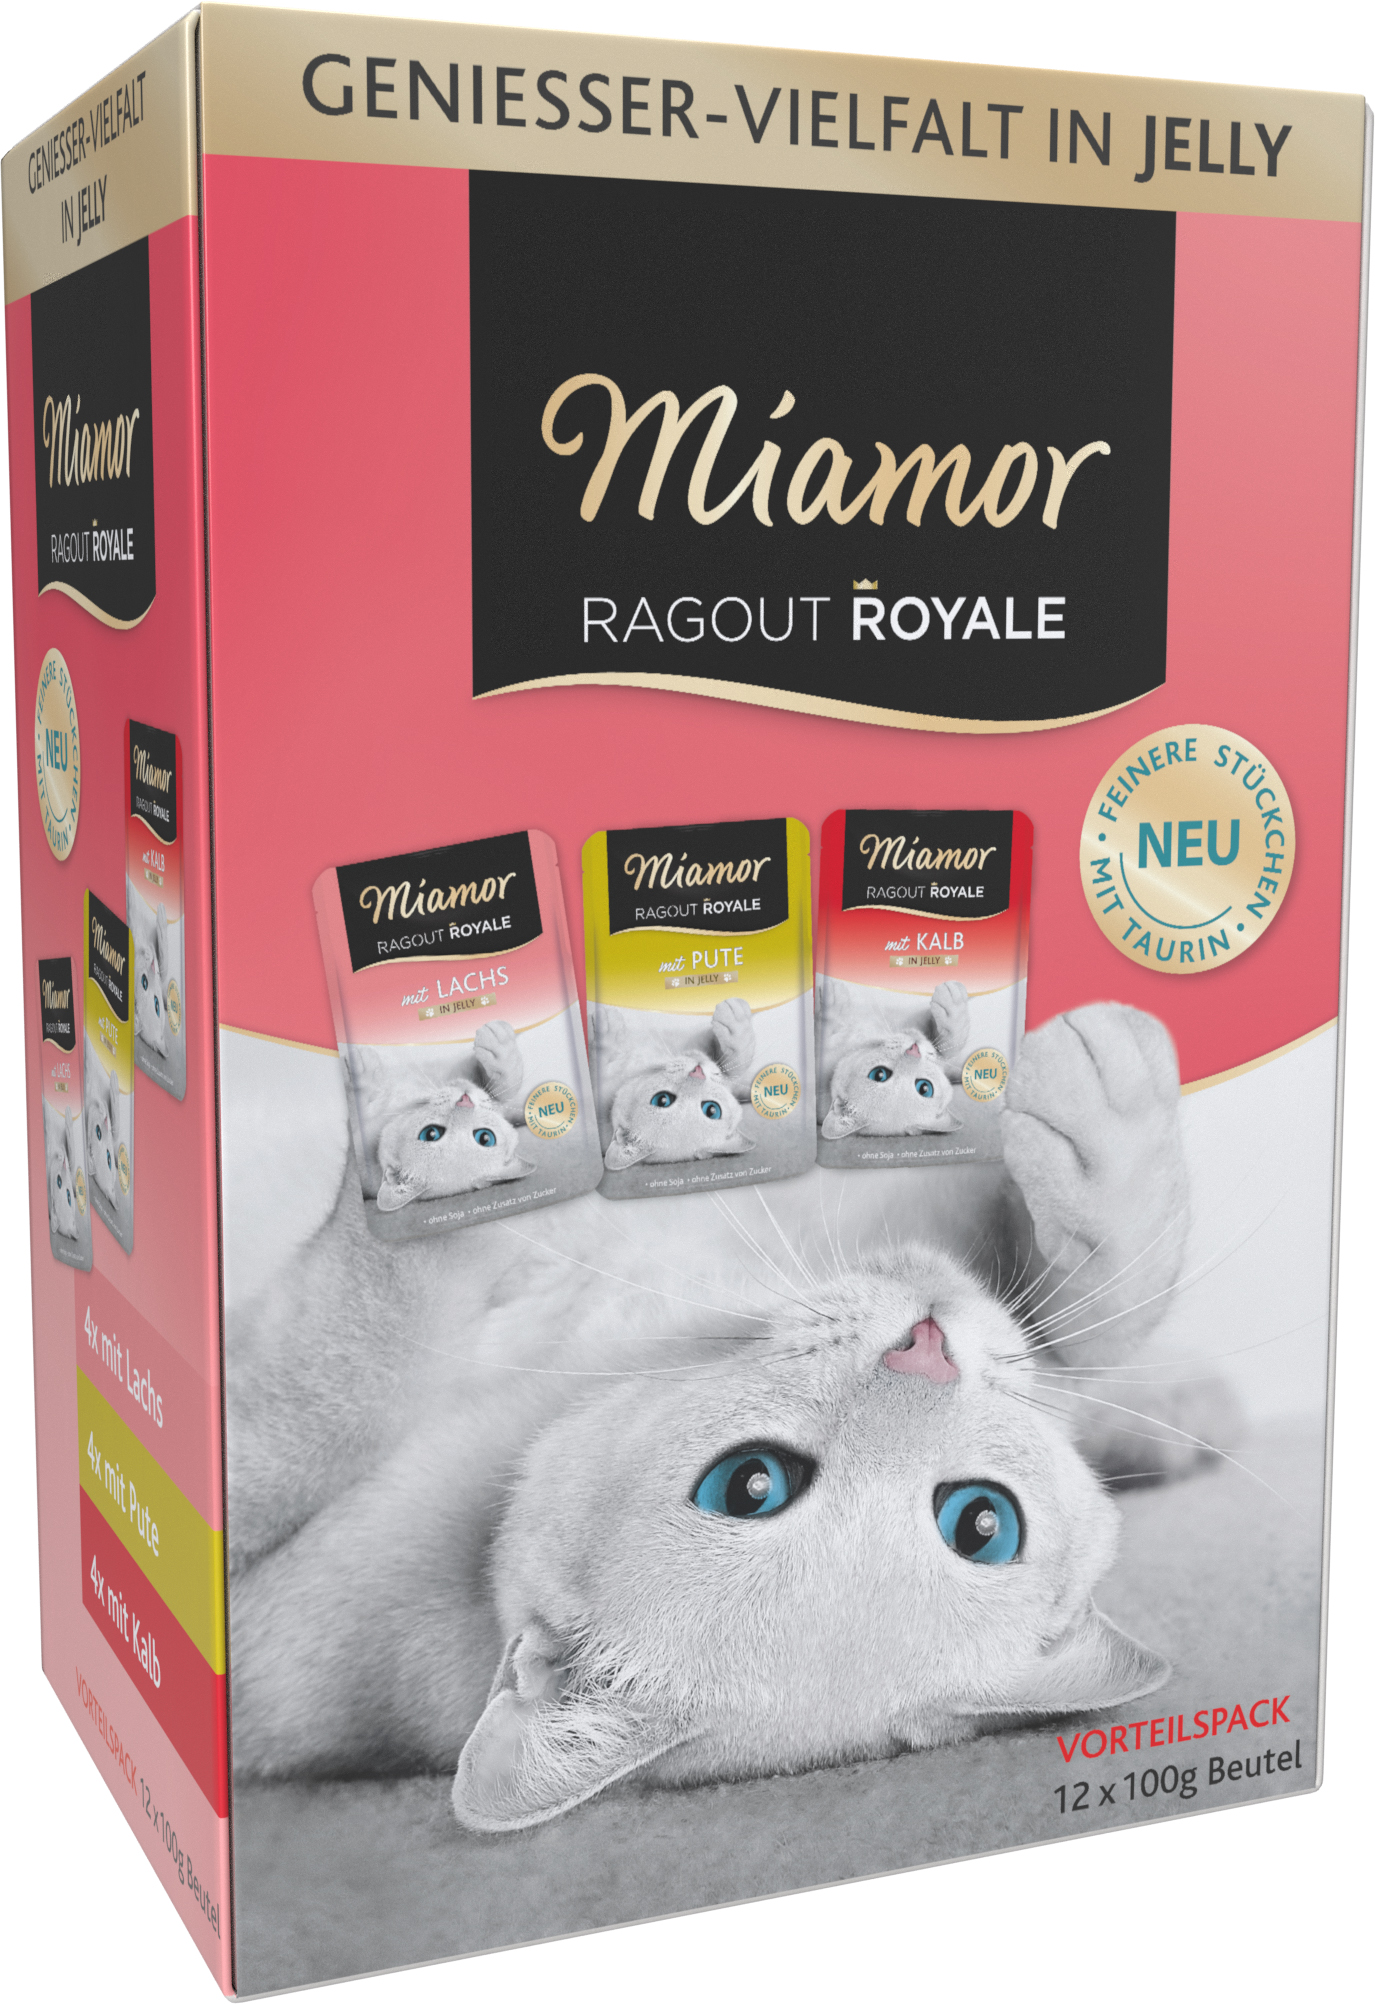 Miamor Ragout Royale in Jelly Multibox 12x100g